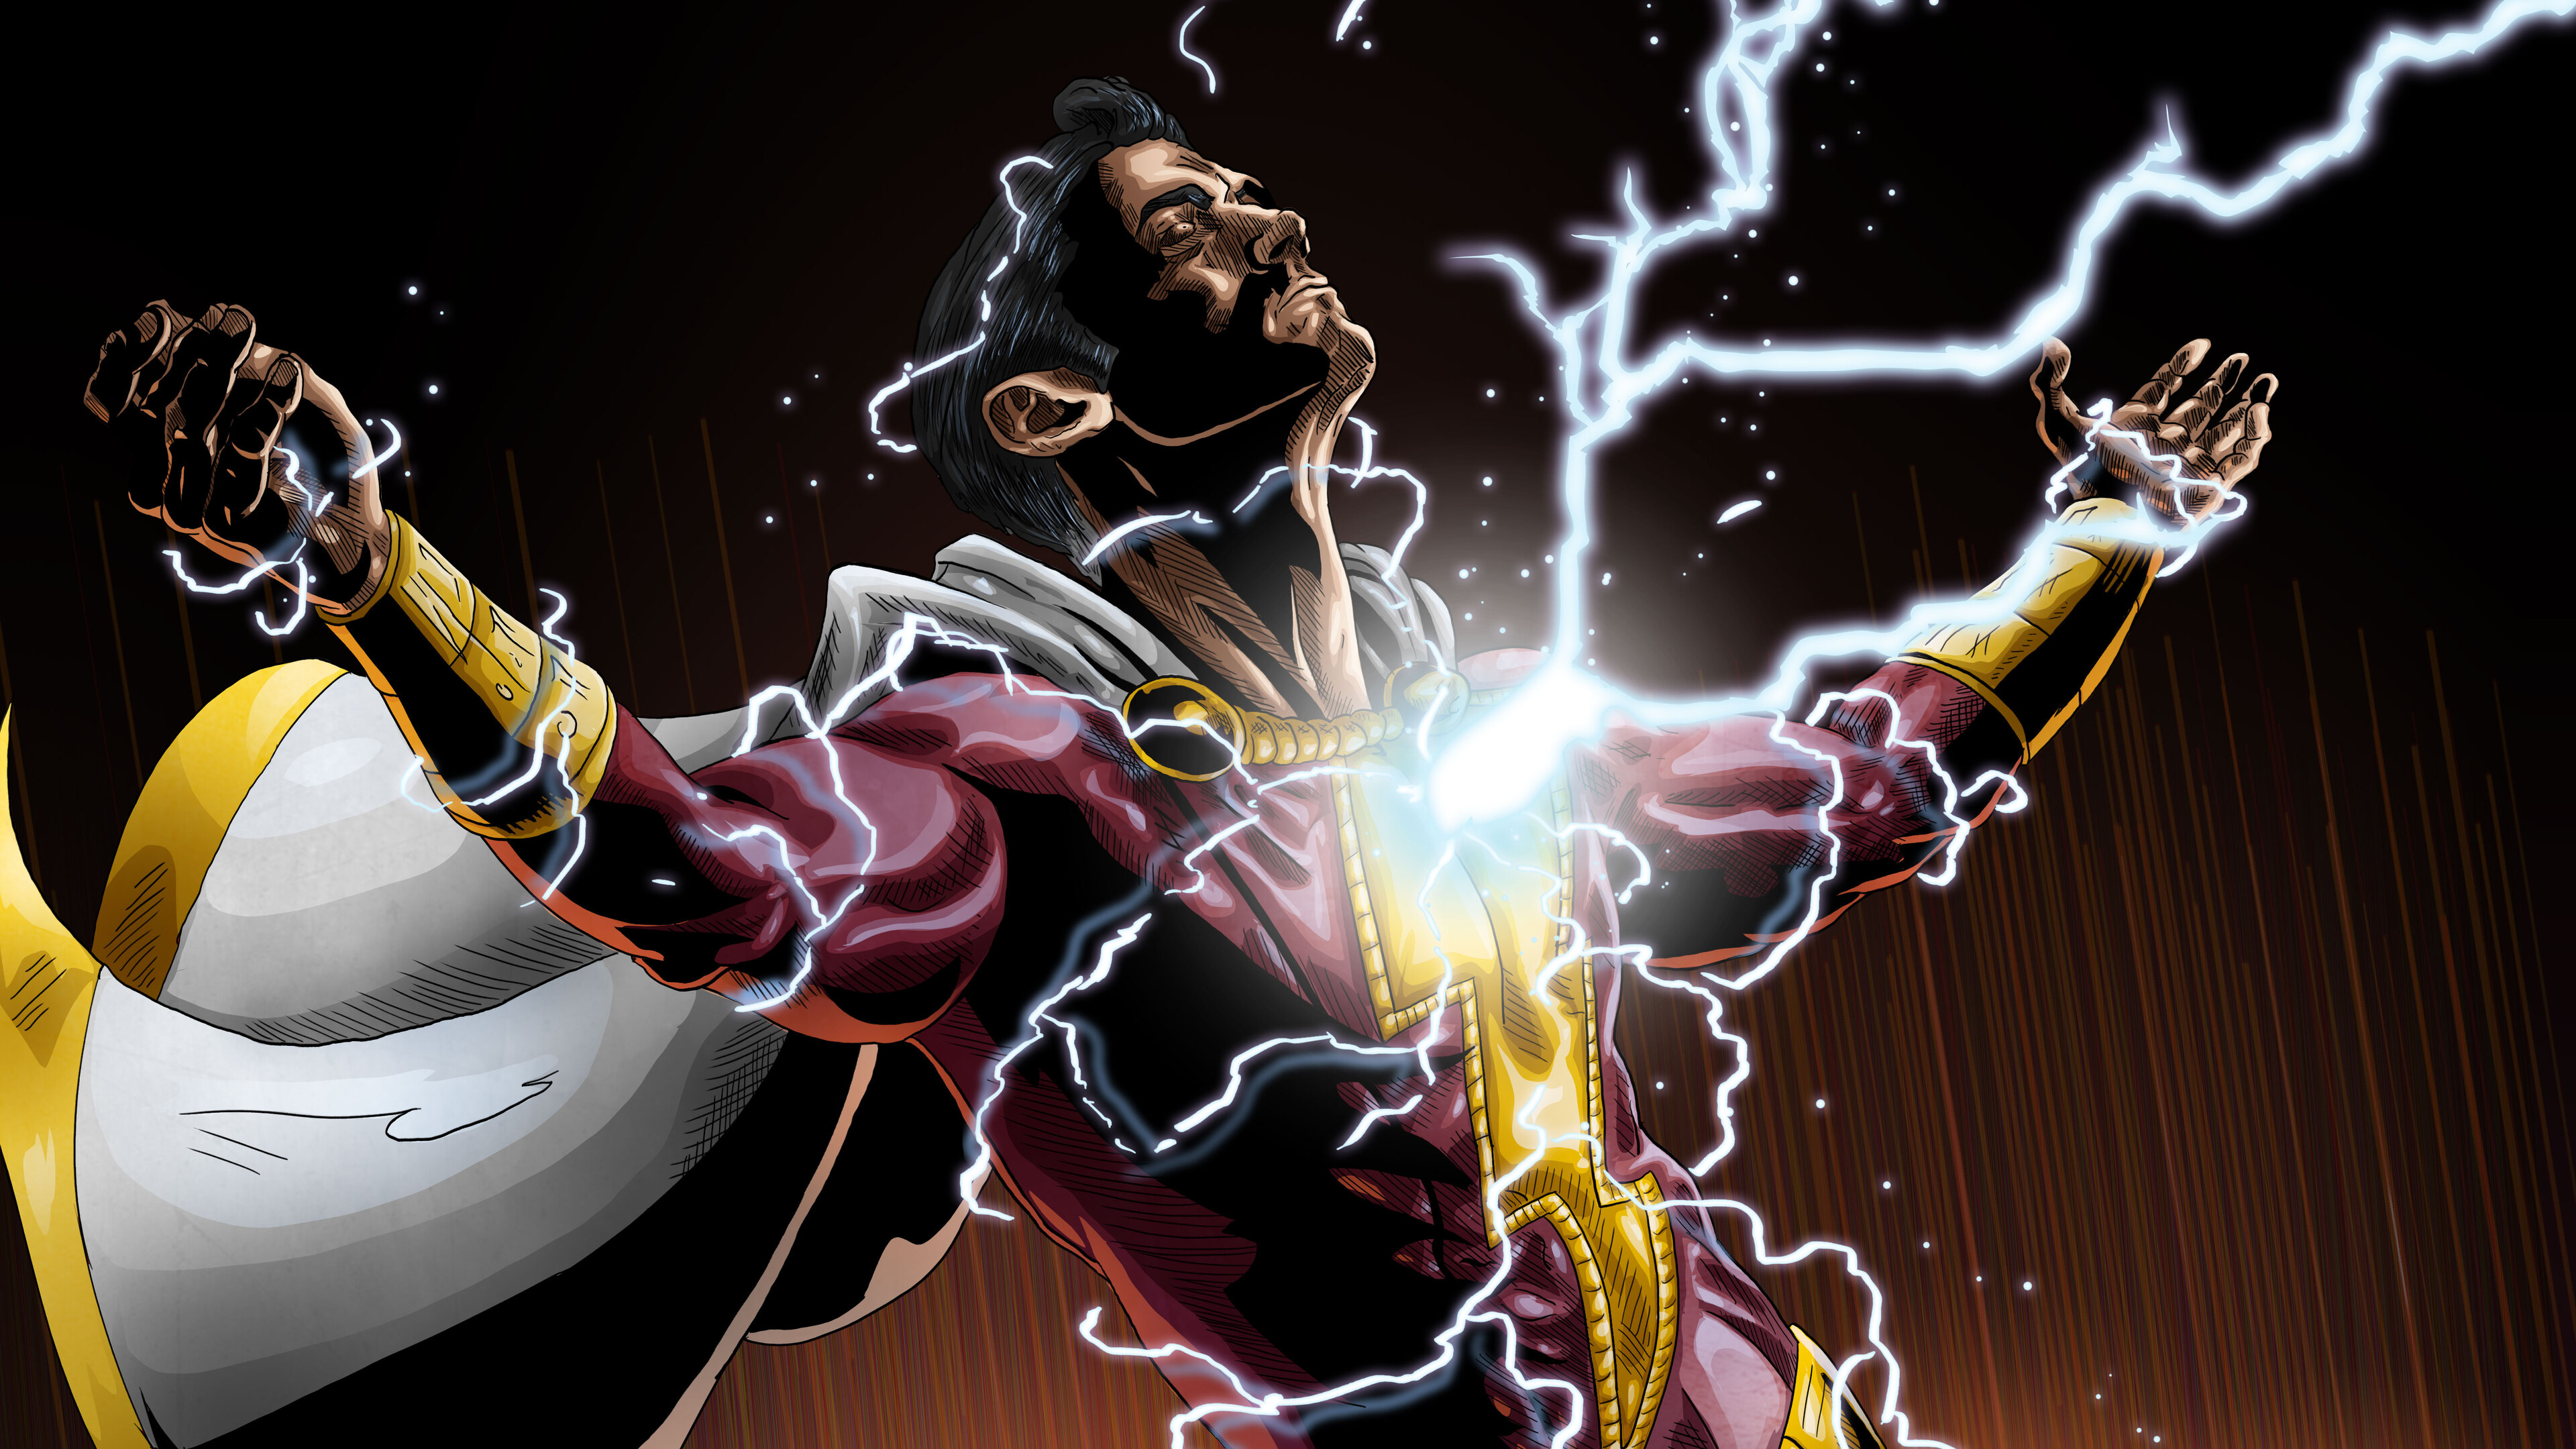 Top 13 Shazam Wallpapers in 4K and Full HD That You Must Download